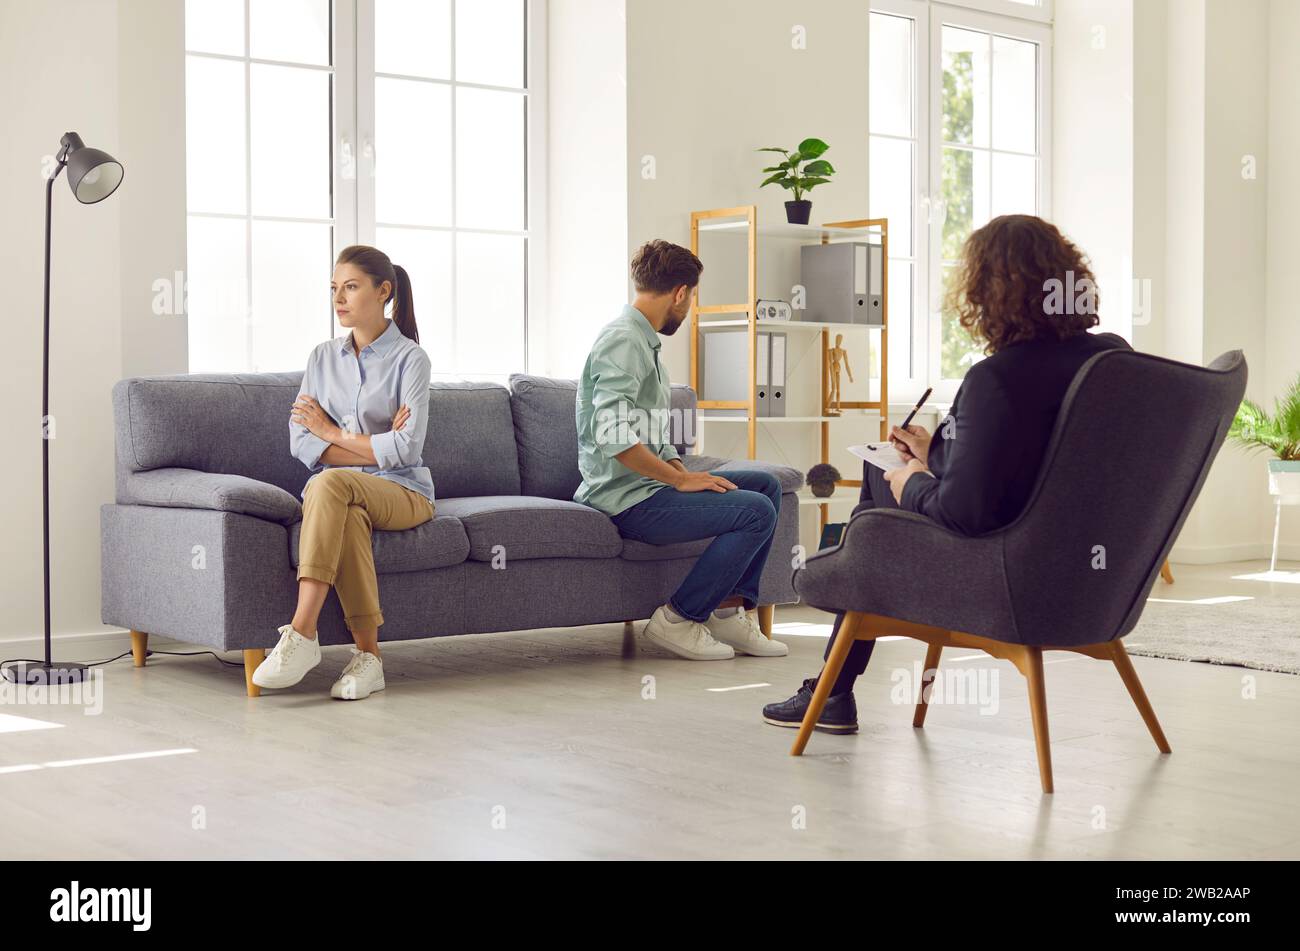 Couple sitting on opposite sides of sofa ignoring each other at family psychologist office. Stock Photo